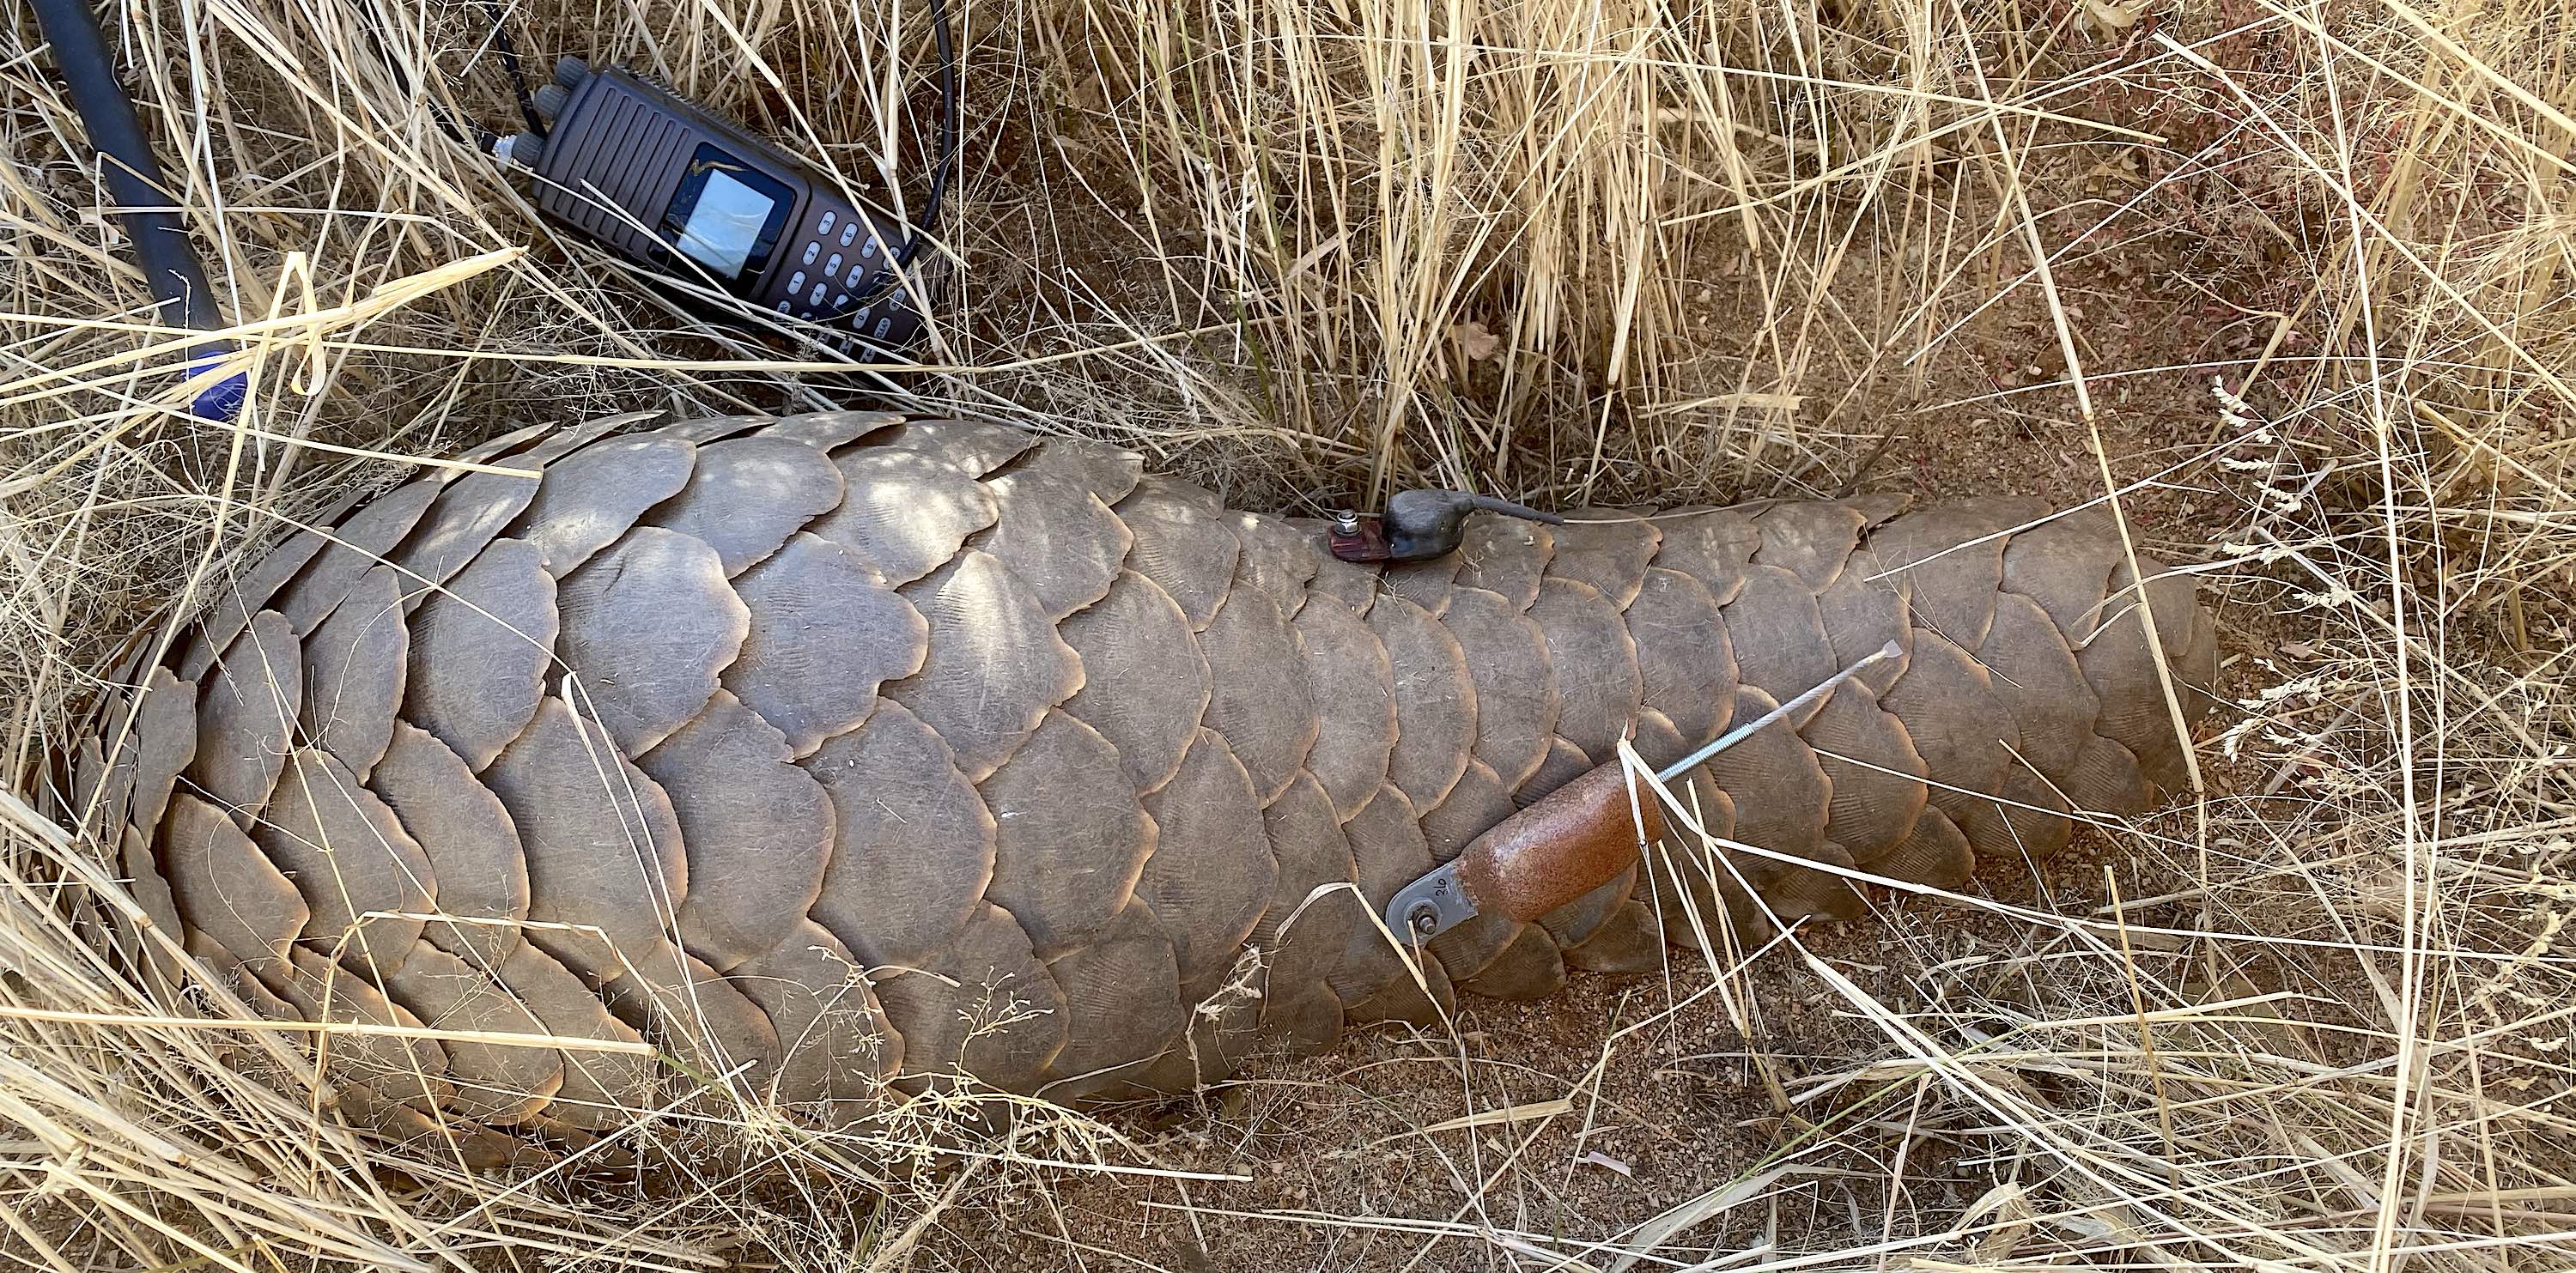 A pangolin being fitted with tracking devices.